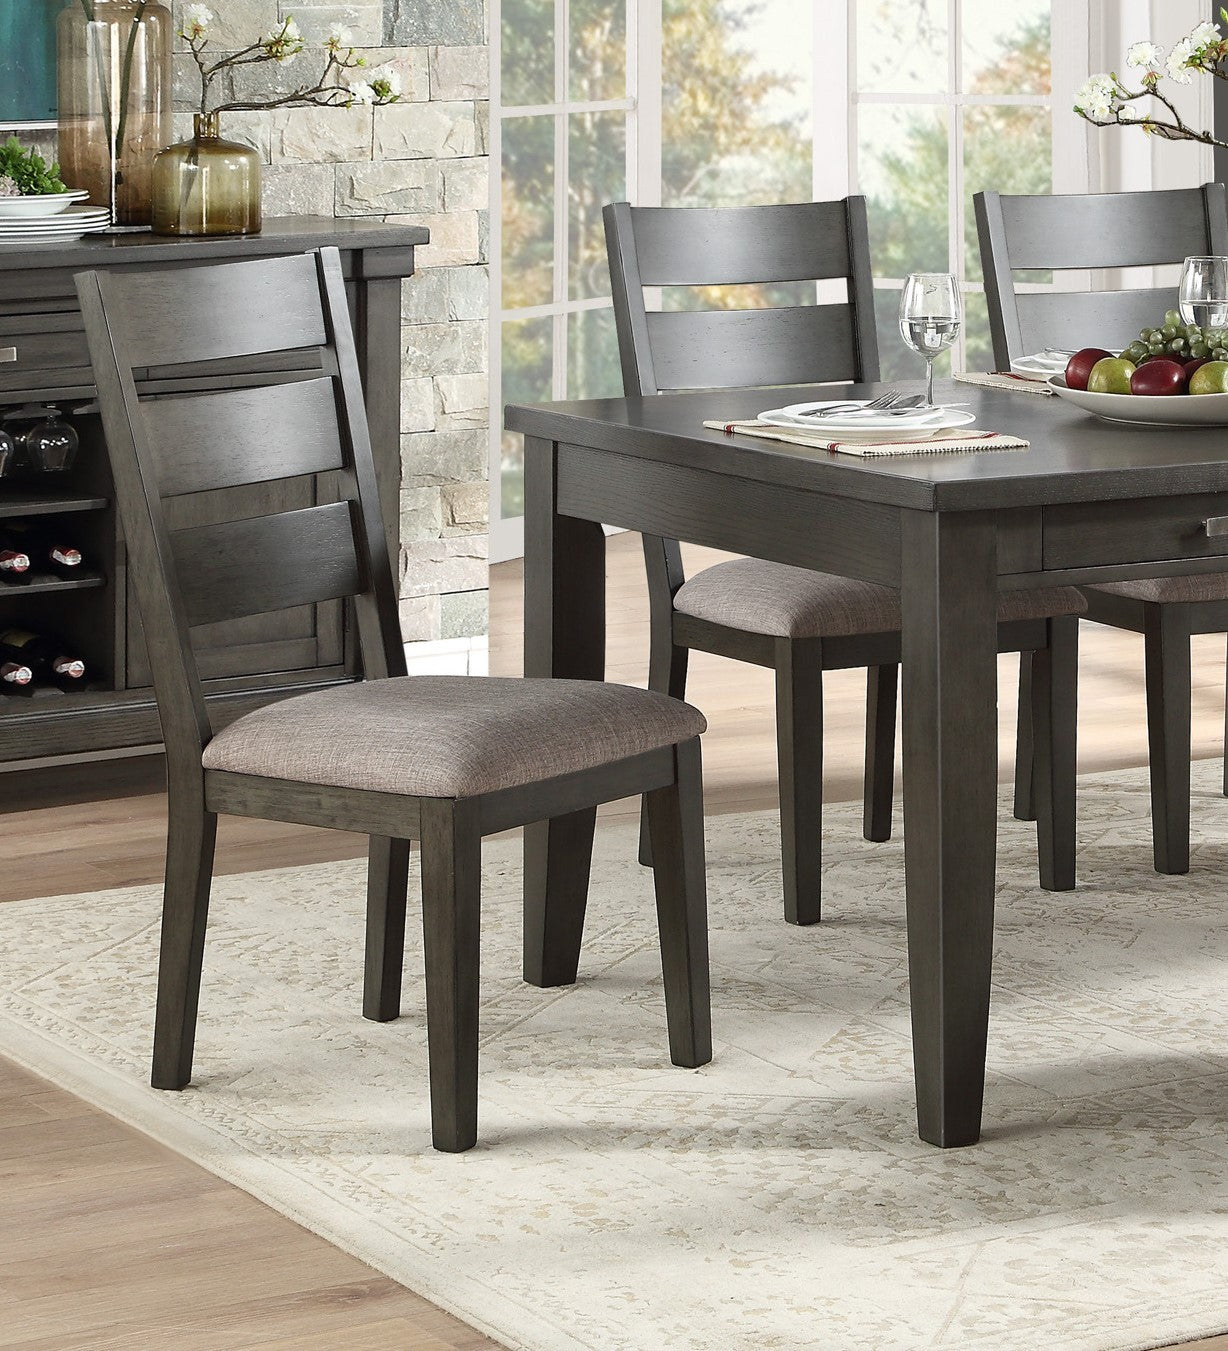 Gray Finish 5pc Dining Set Table with 6x Drawers and wood-wood-gray-seats 4-wood-dining